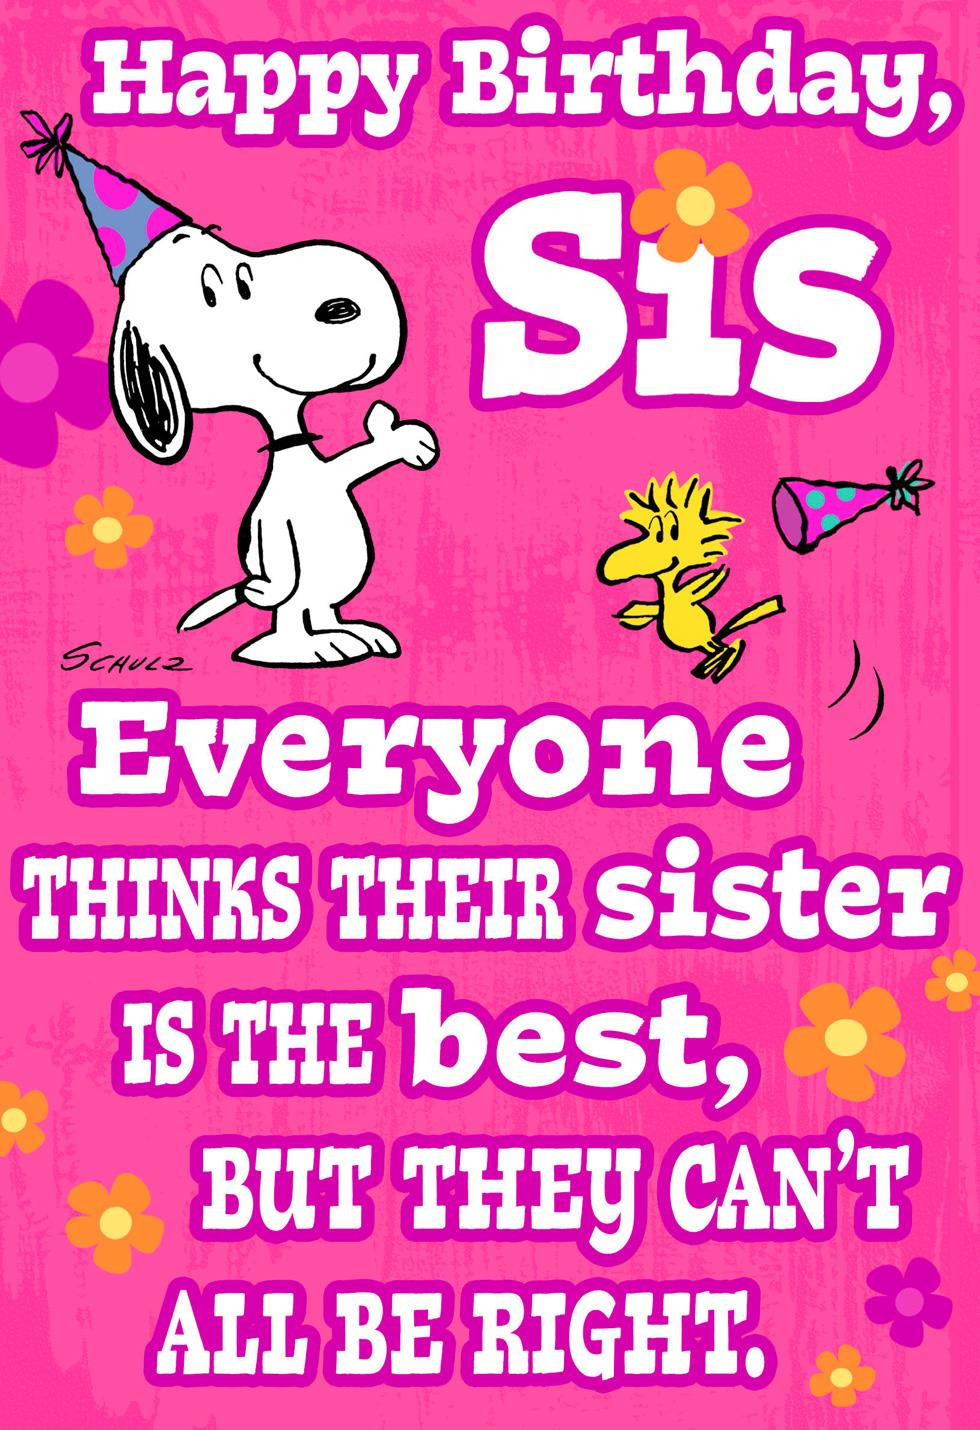 Birthday Wishes Sister Funny
 Peanuts Snoopy and Woodstock Best Sister Funny Birthday